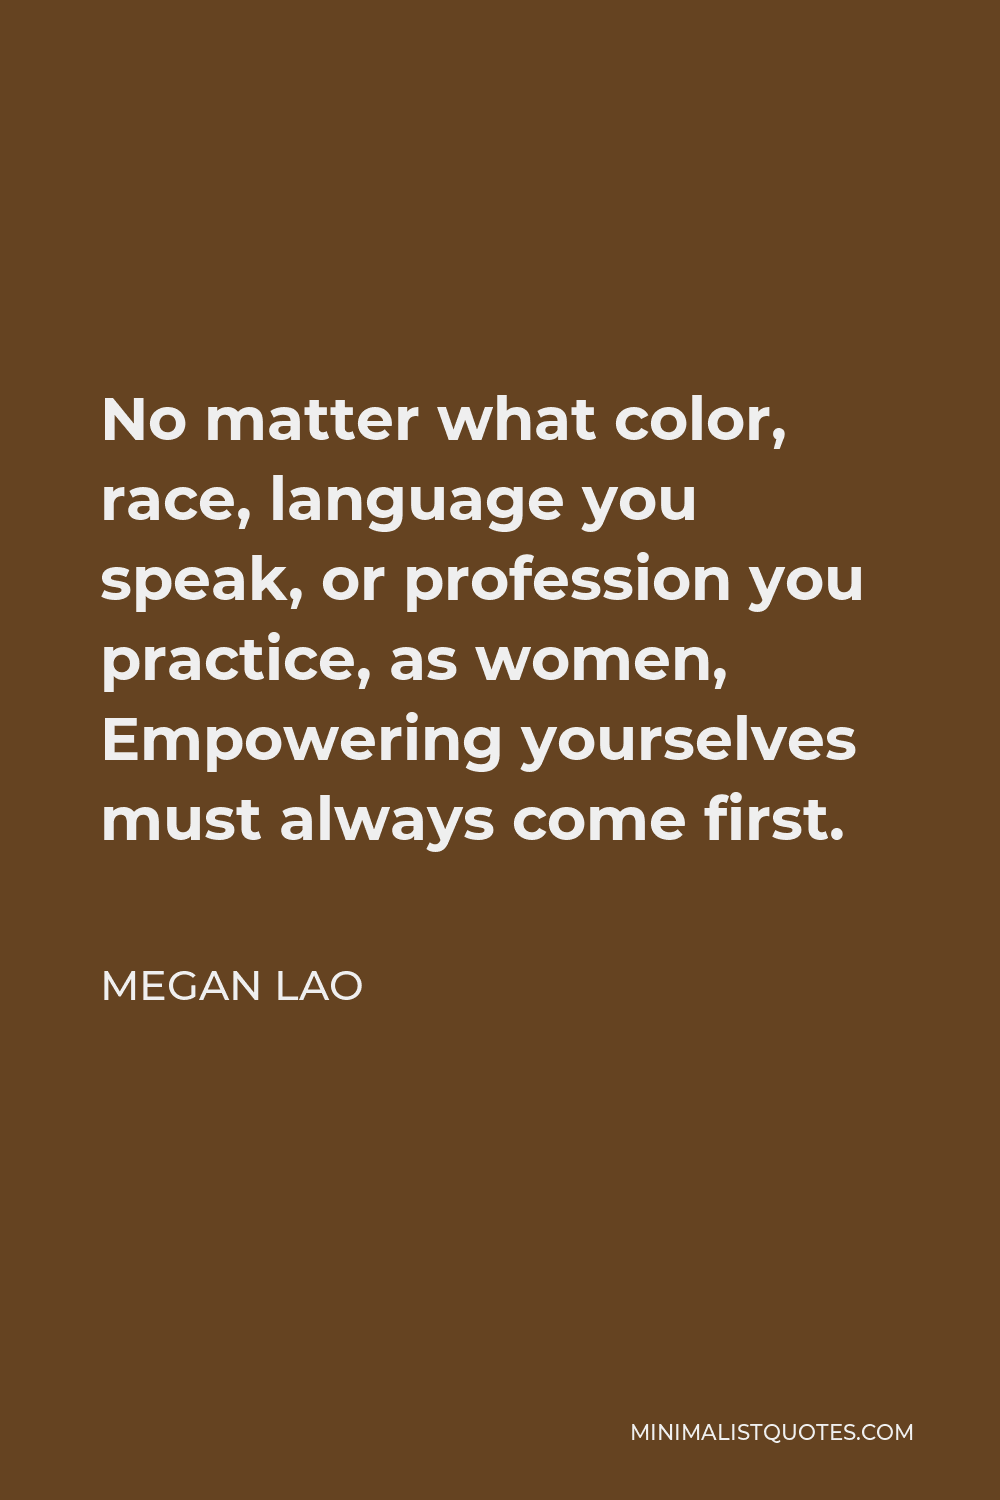 Megan Lao Quote - No matter what color, race, language you speak, or profession you practice, as women, Empowering yourselves must always come first.